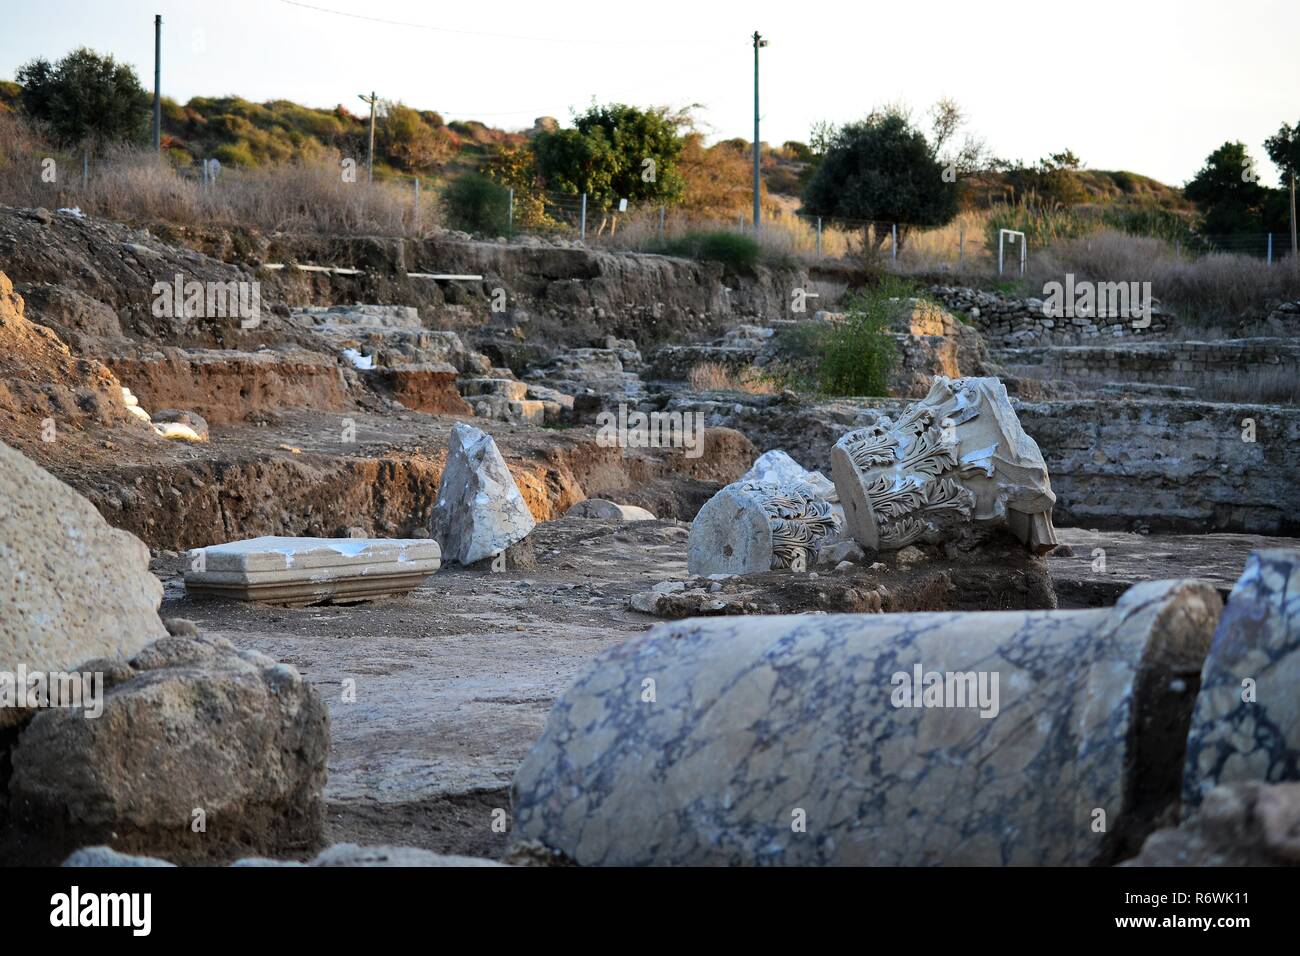 Archaeology class visiting ruins of Ancient and Biblical City of Ashkelon in Israel, Holy Land Stock Photo